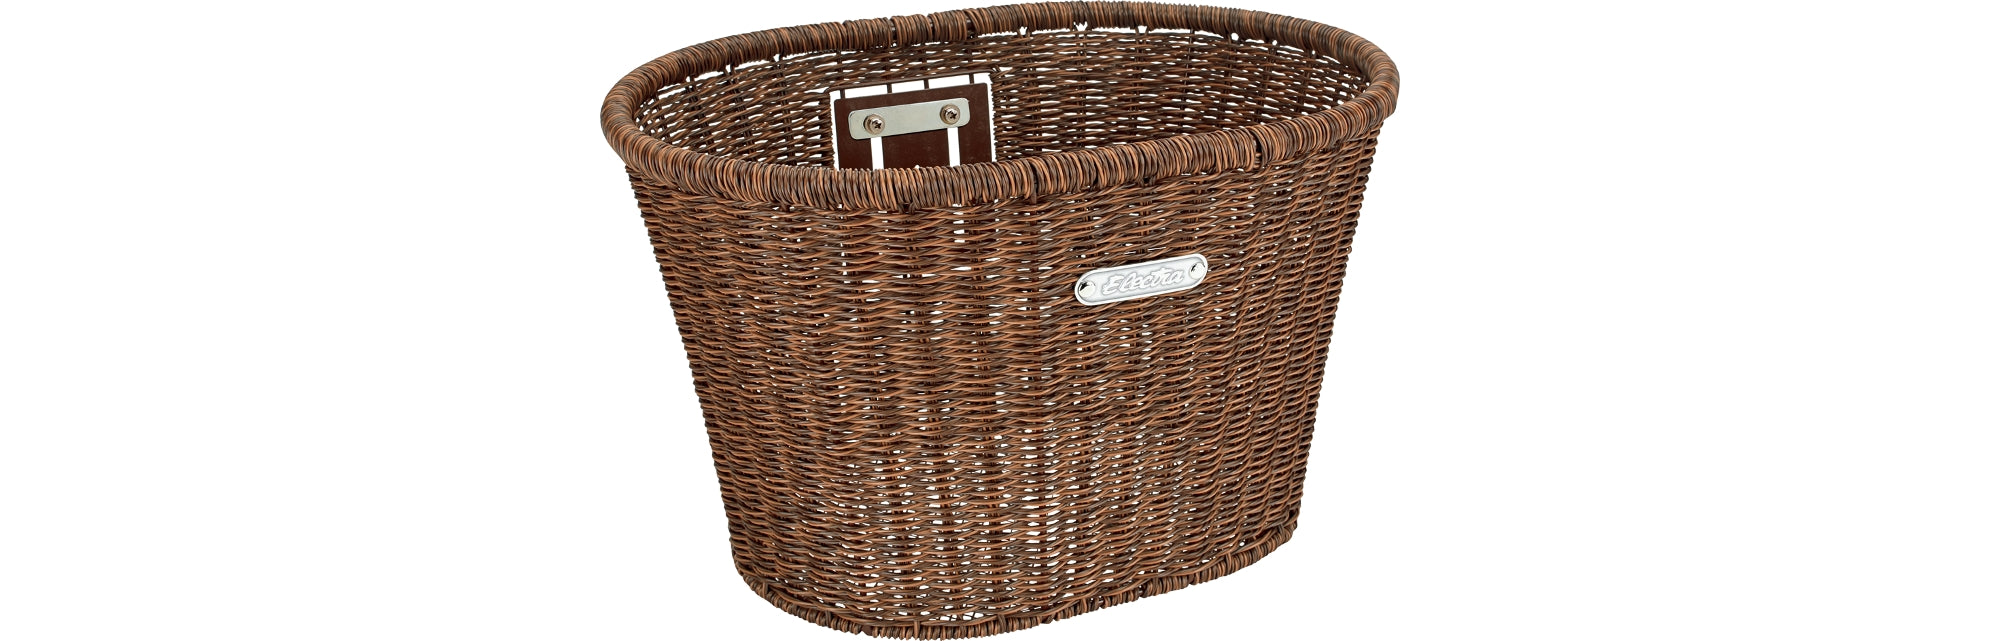 Electra Plastic Woven Basket Brn – Incycle Bicycles